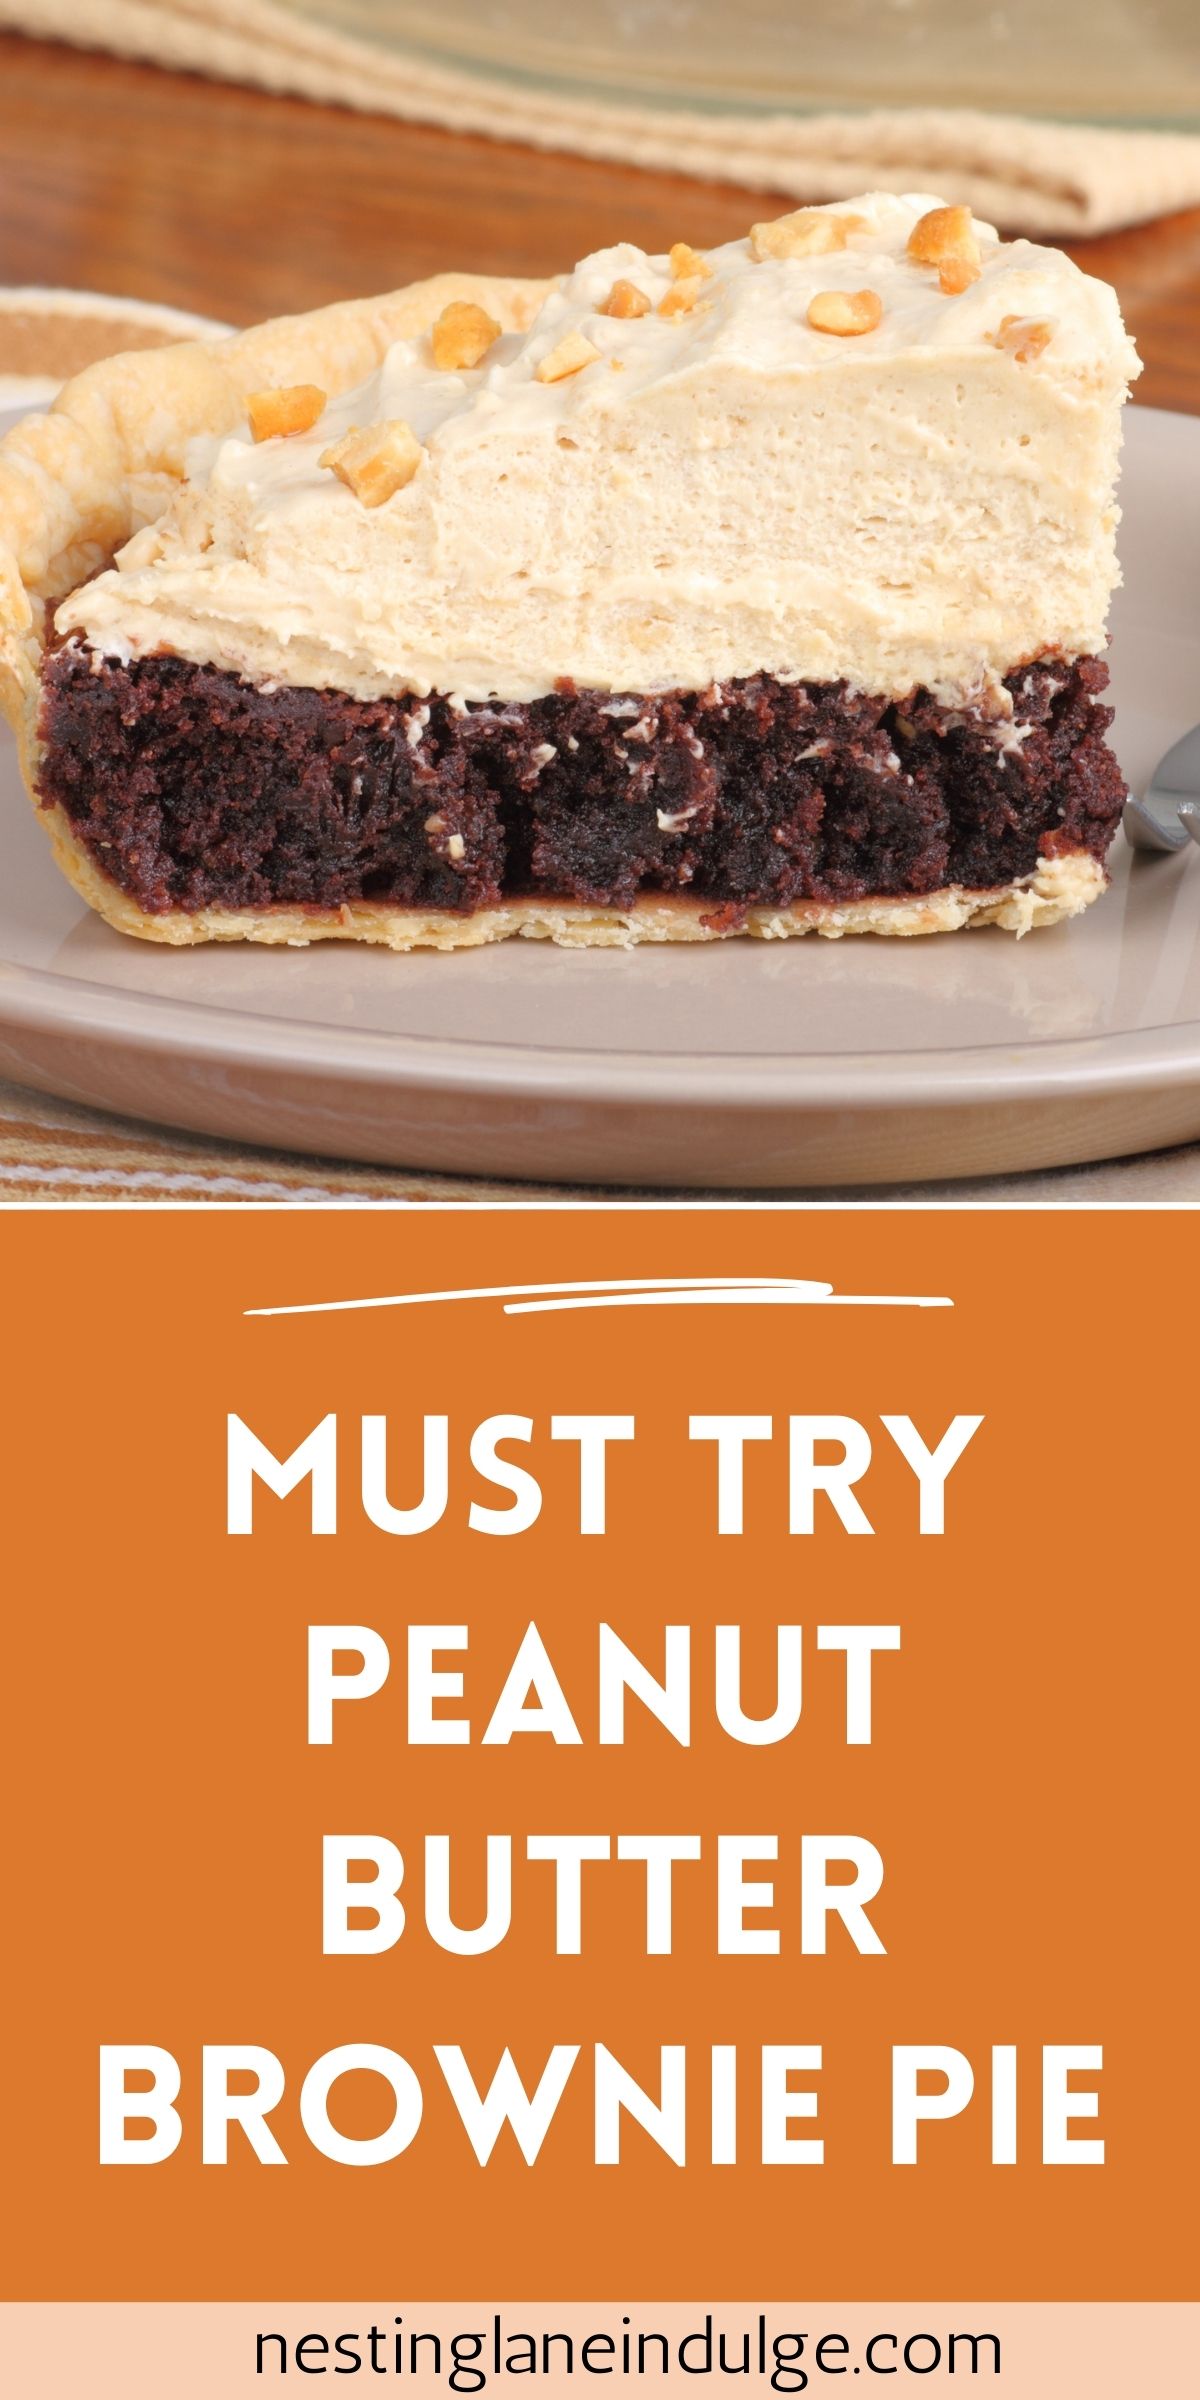 Graphic for Pinterest of Must Try Peanut Butter Brownie Pie REcipe.